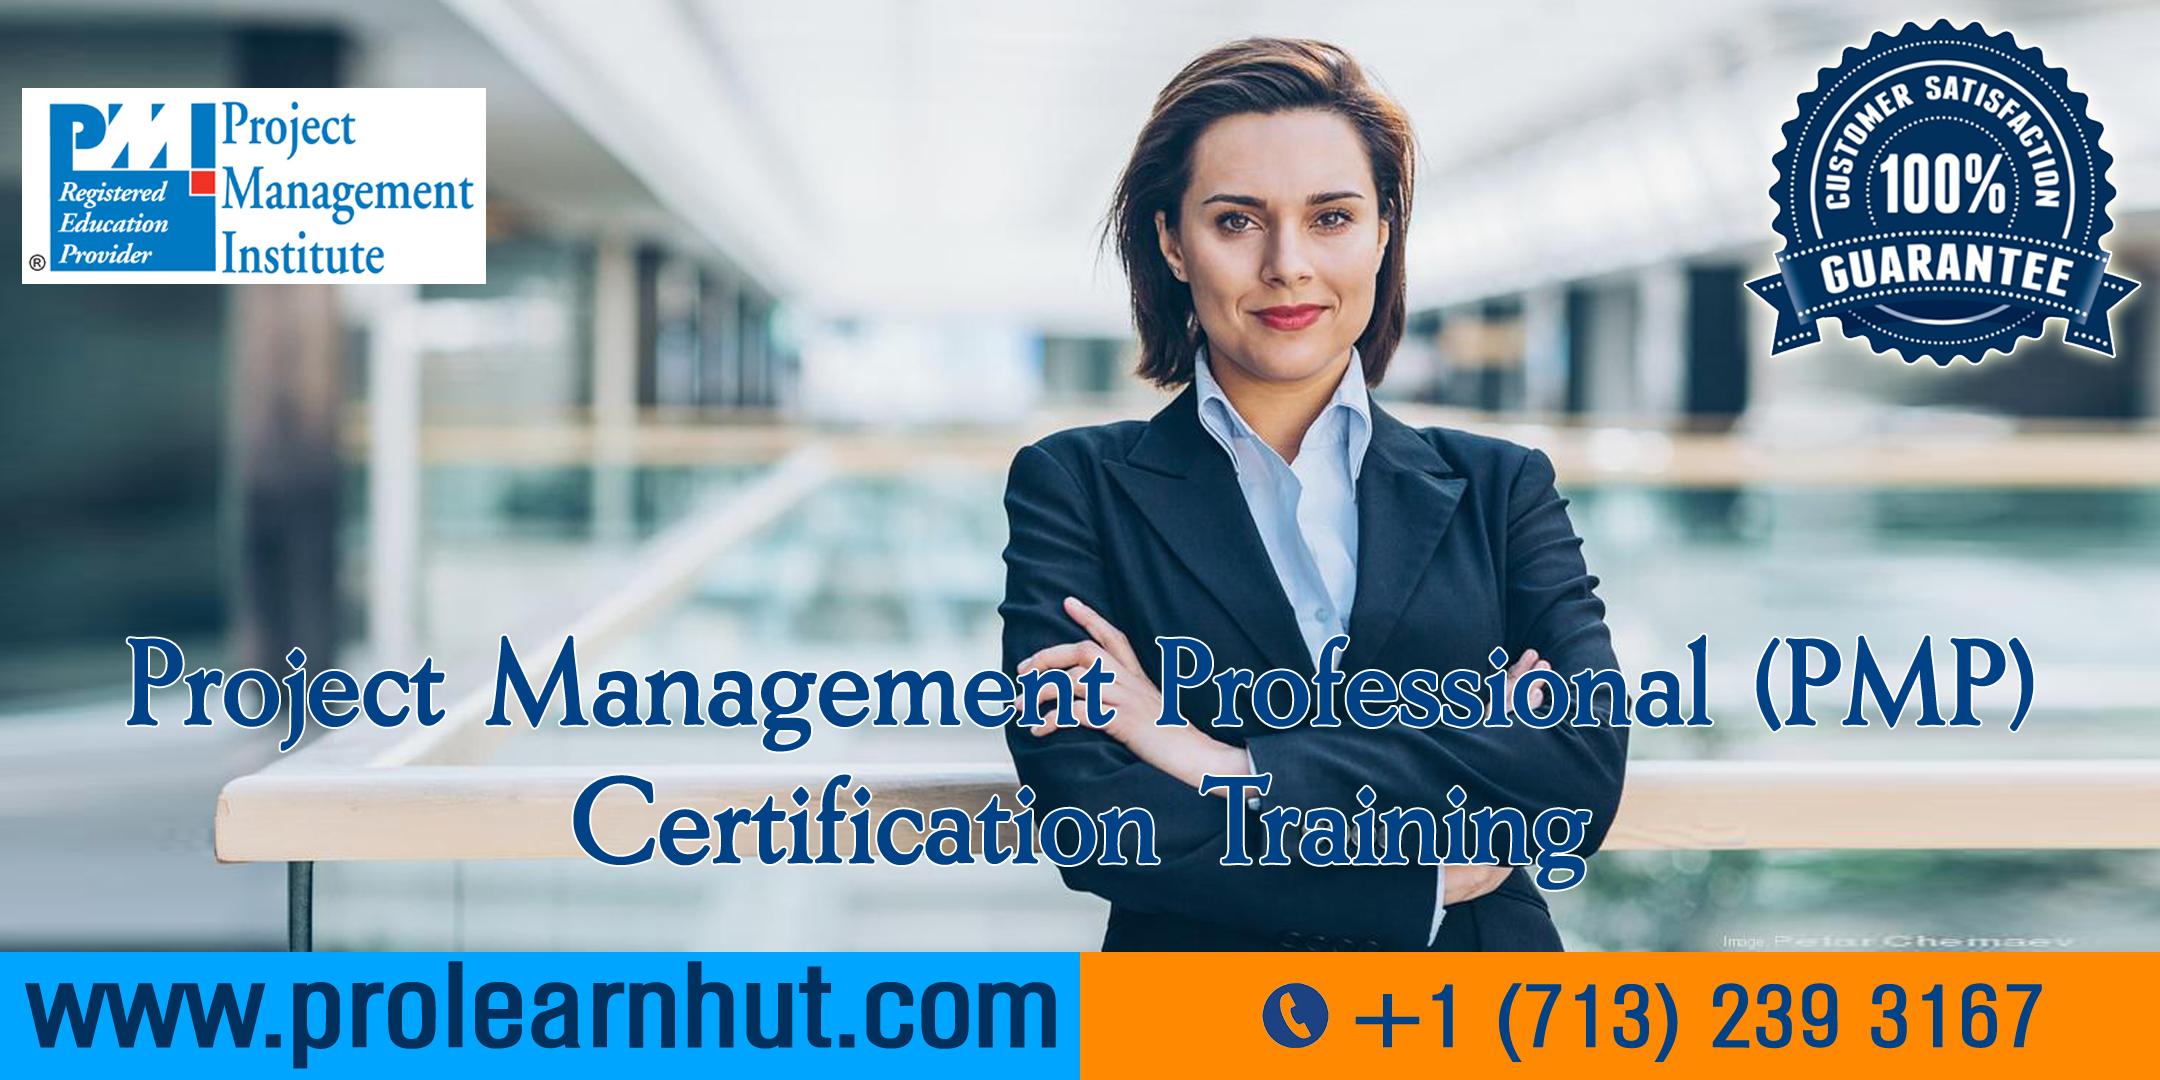 PMP Certification | Project Management Certification| PMP Training in Hayward, CA | ProLearnHut